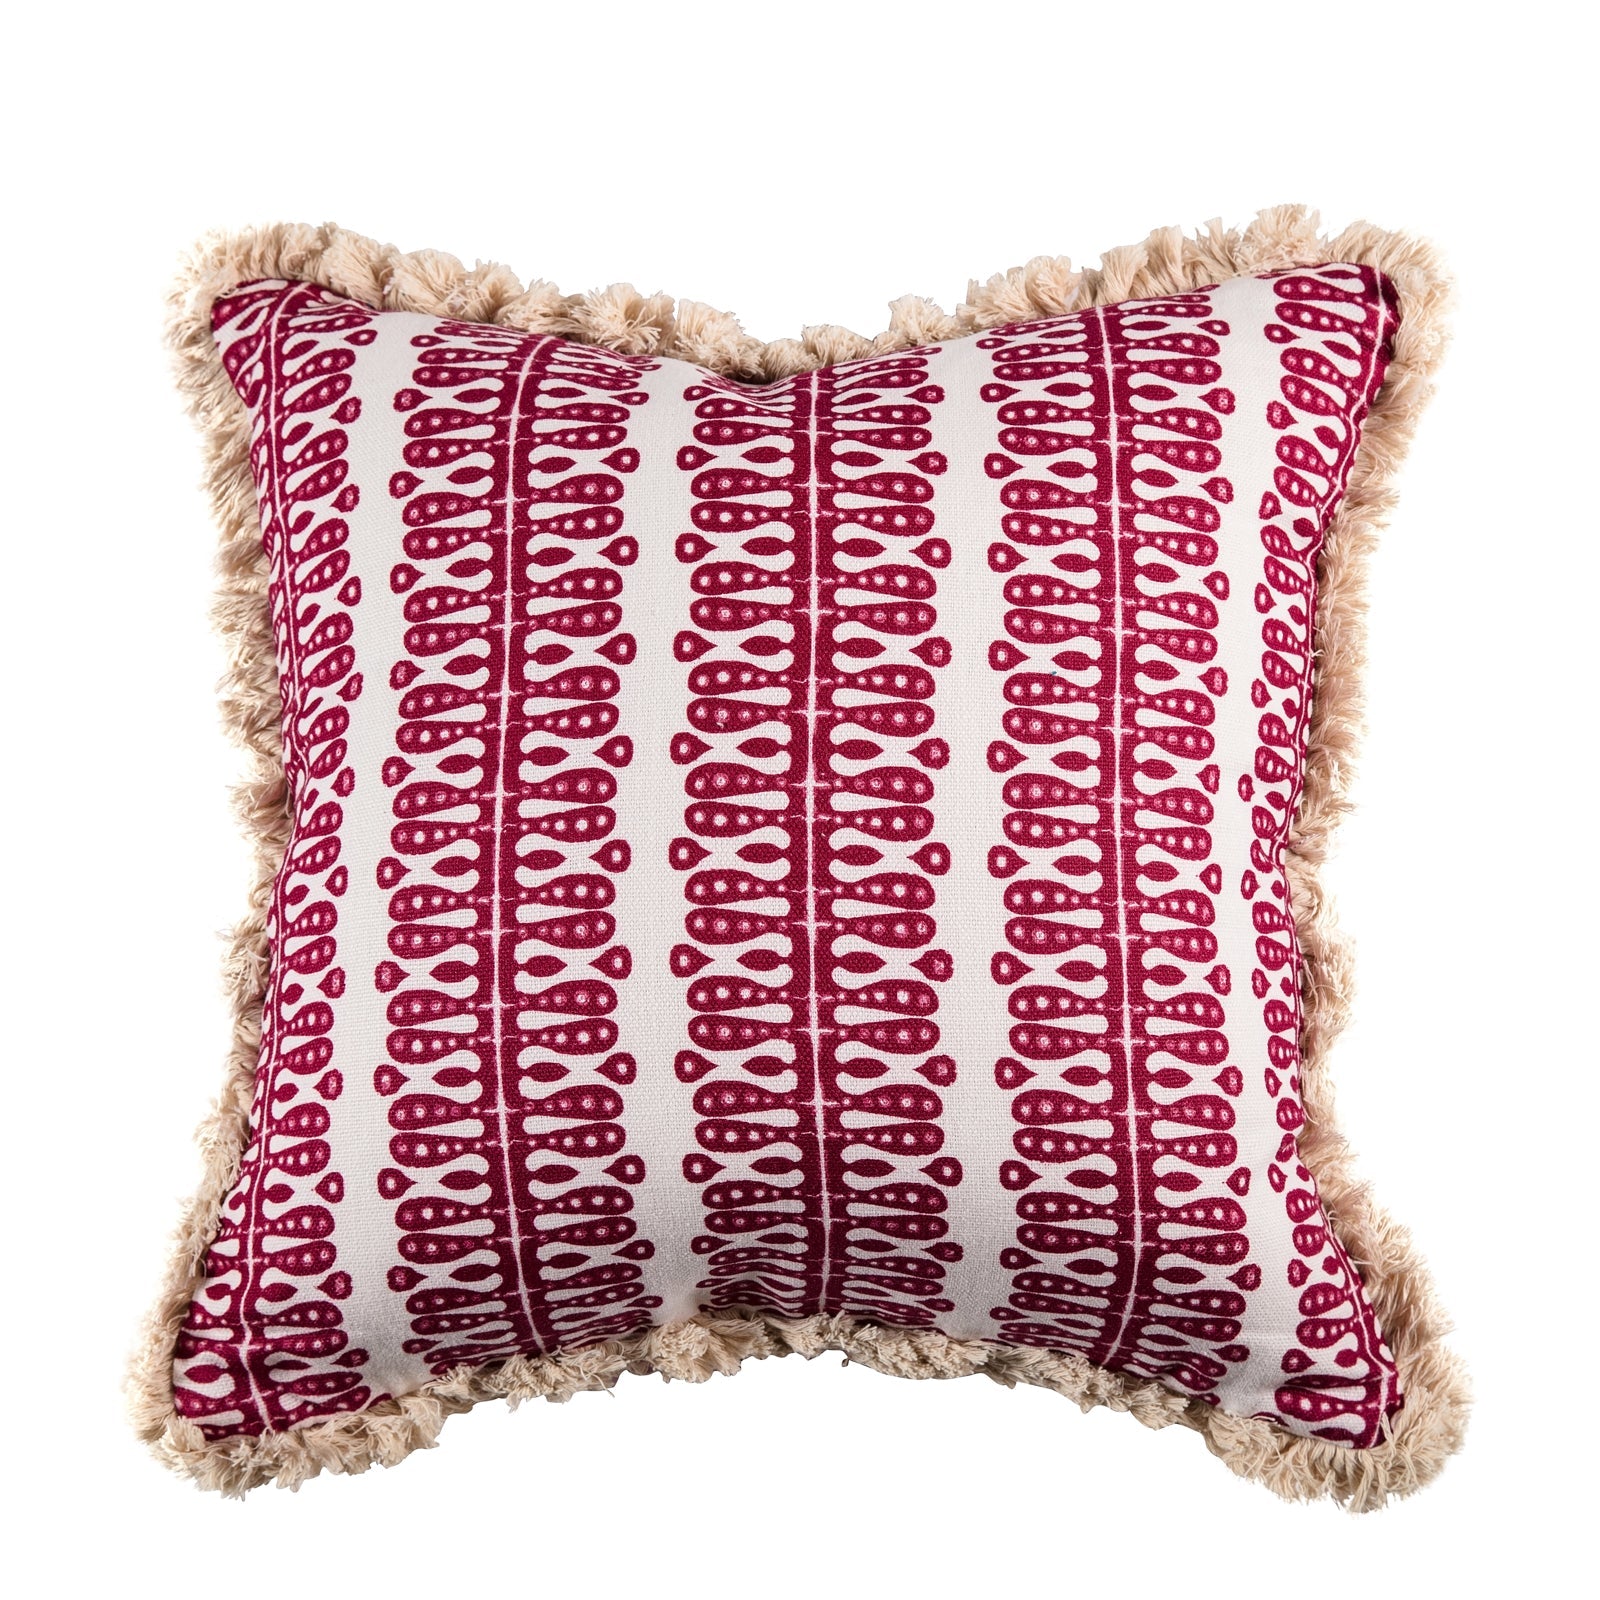 Heart and Minds Cushion in Raspberry with Raspberry velvet back and cream fringe